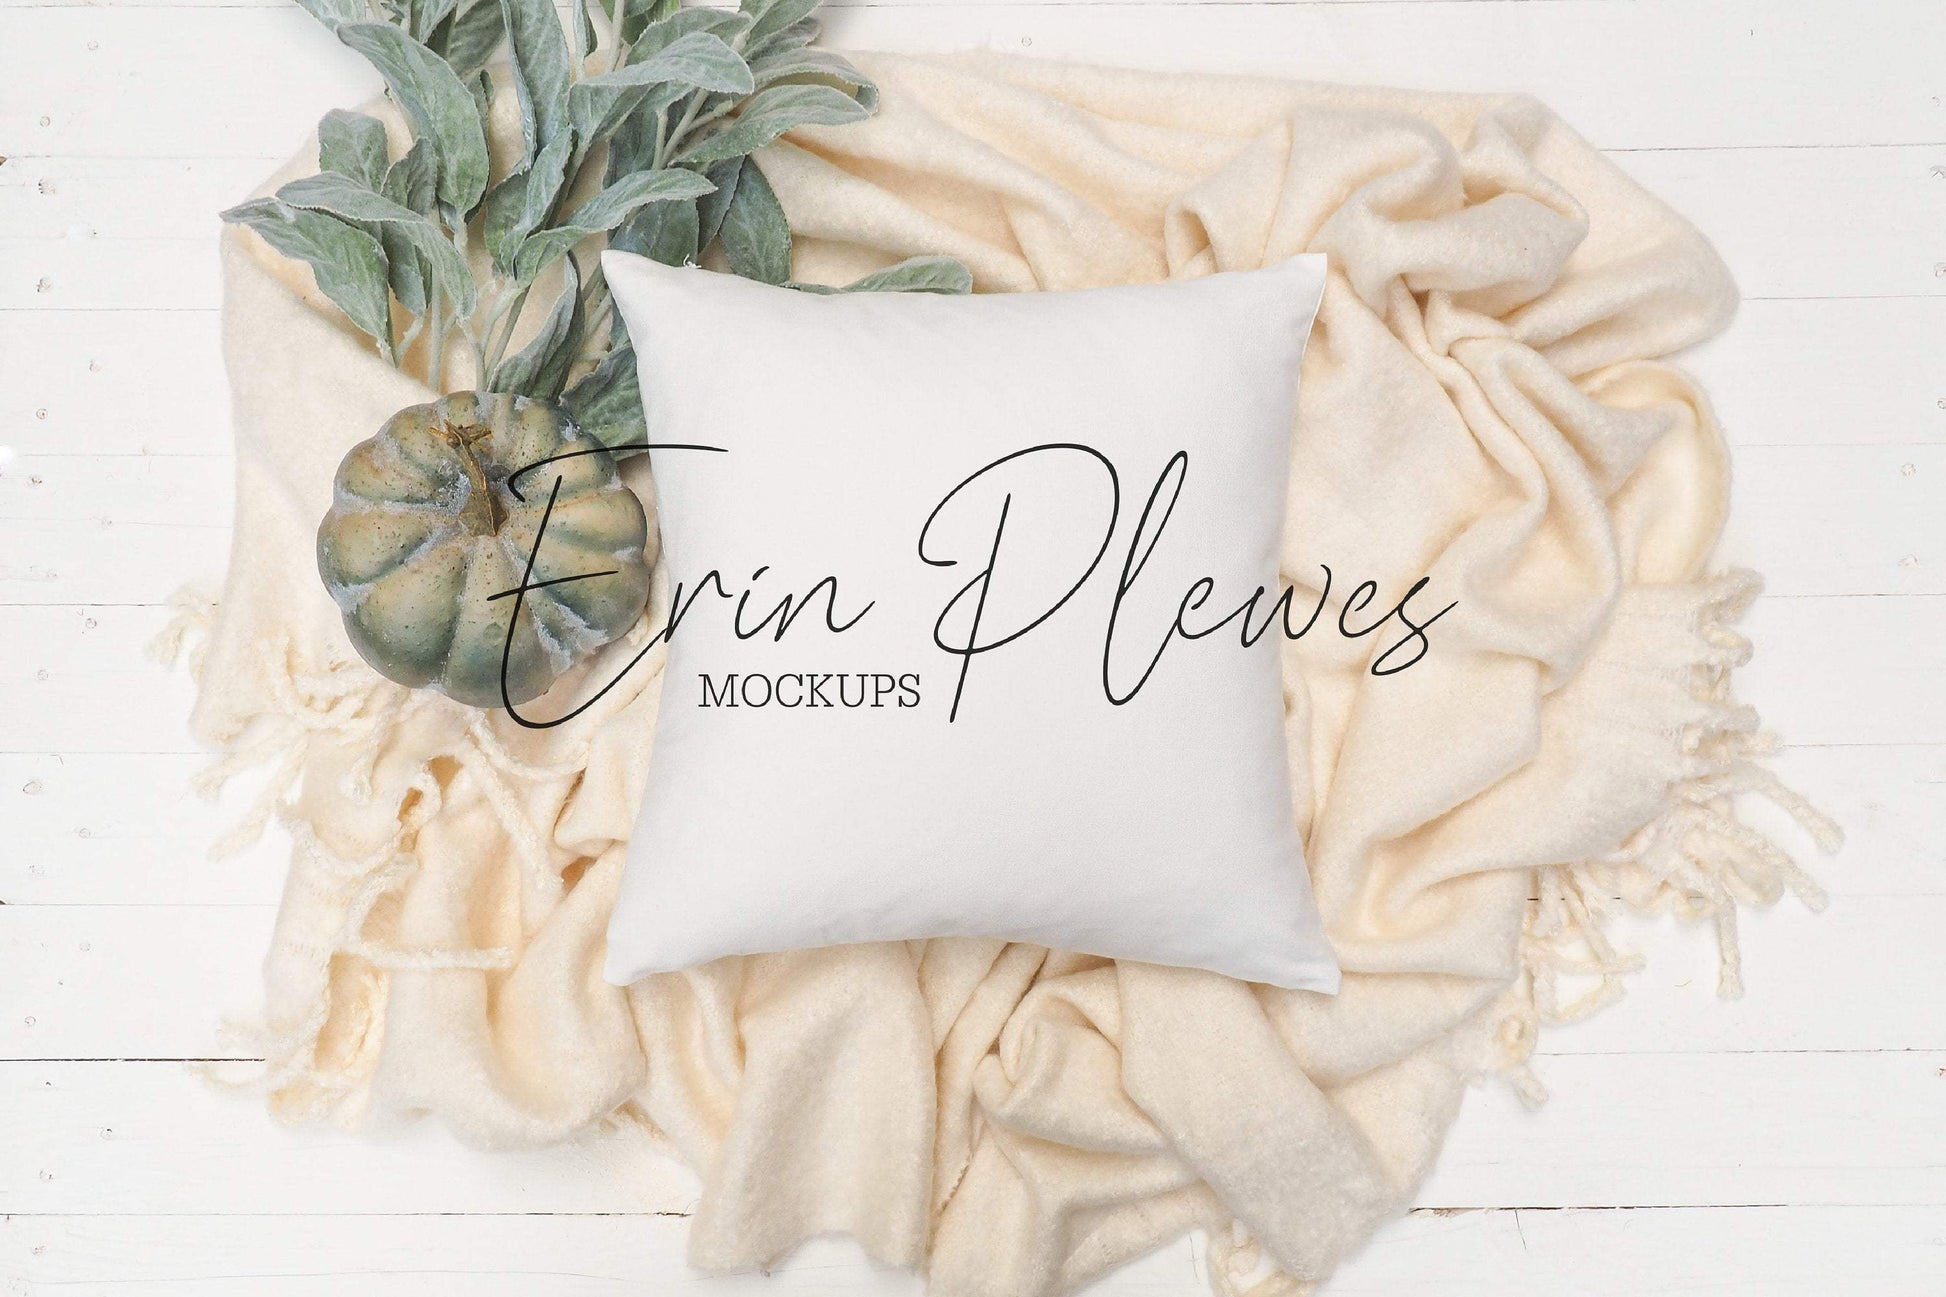 Erin Plewes Mockups Square Pillow Mockup, Pillow Mockup with blanket and pumpkin for fall lifestyle stock photo, White pillow mock up, Jpg digital download